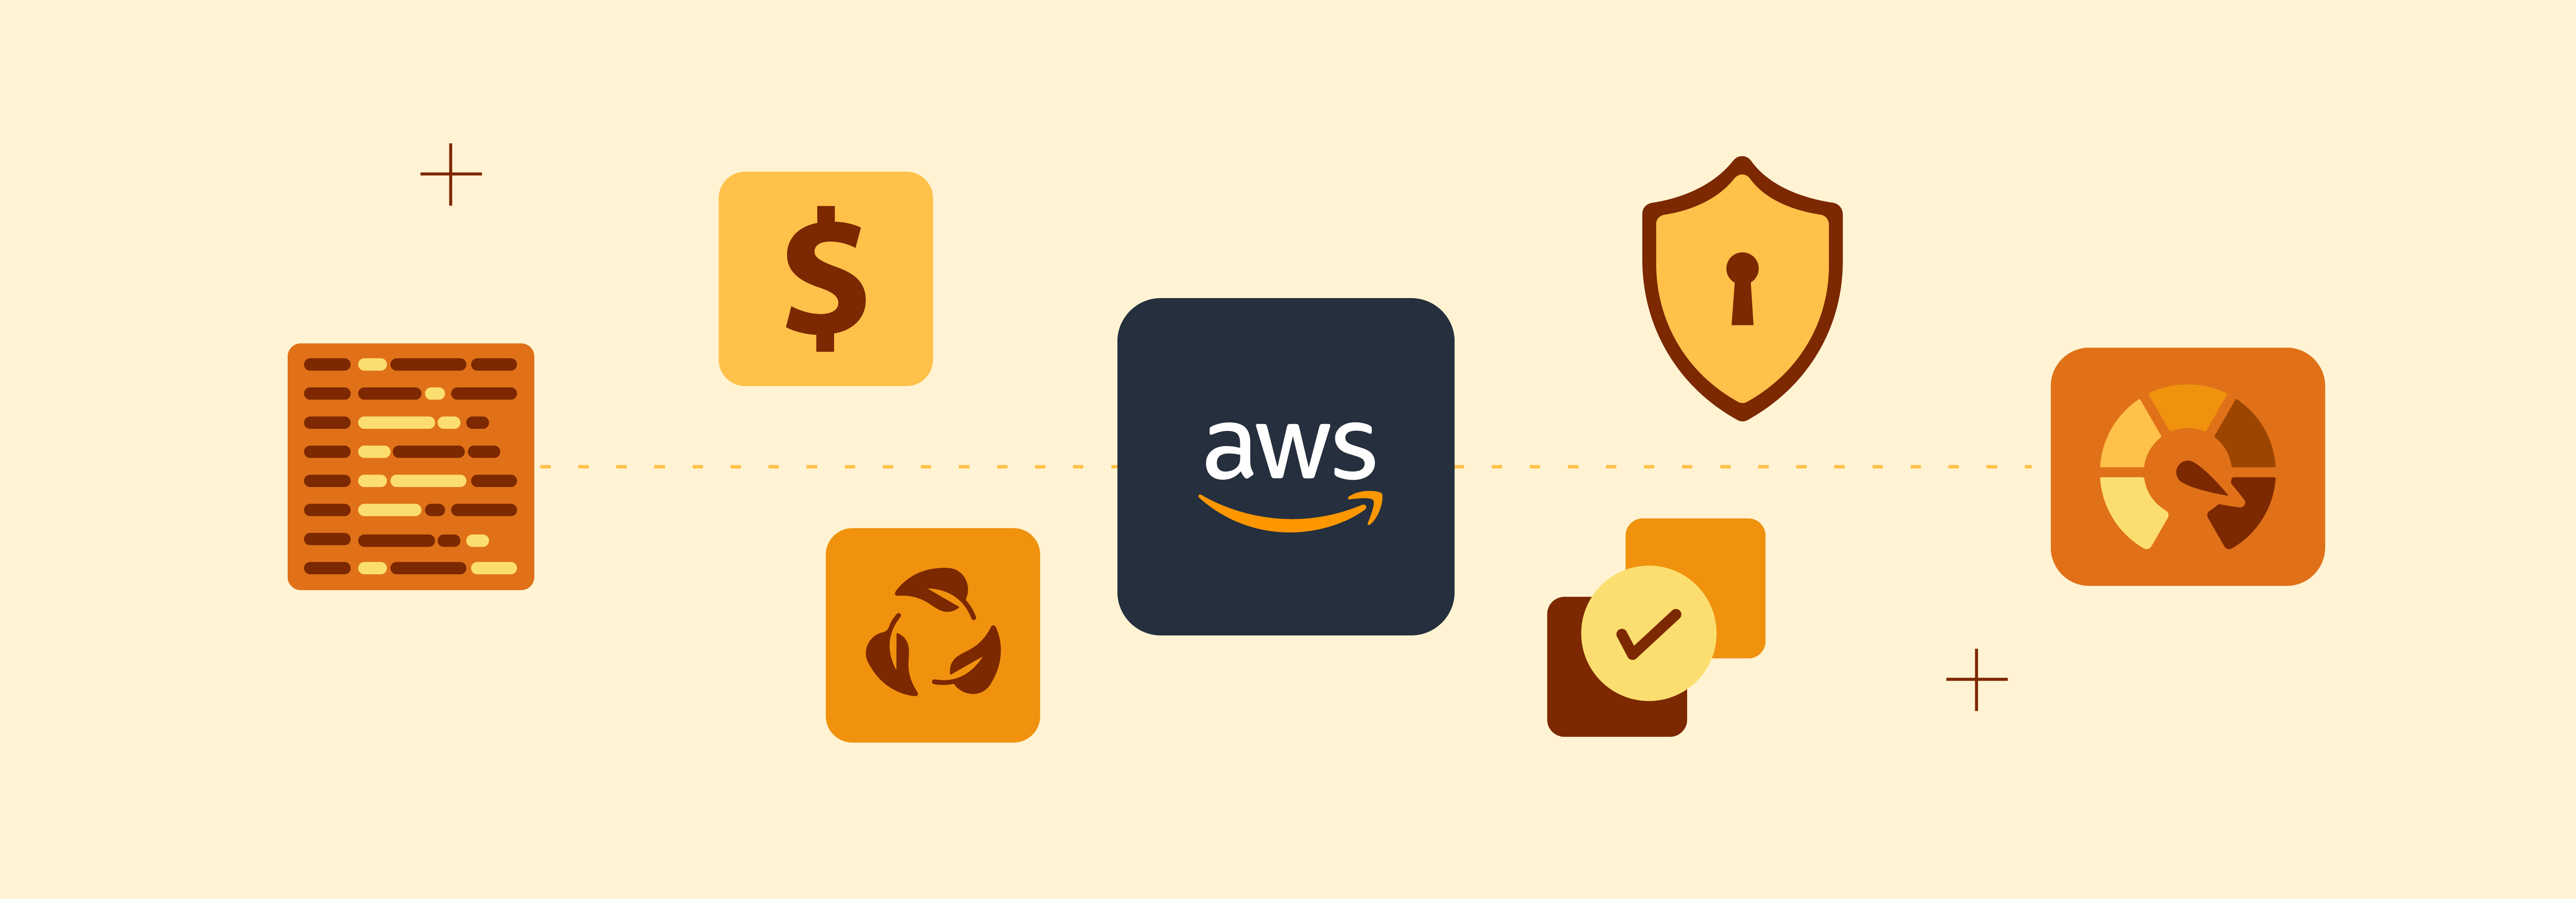 Components of AWS Architecture